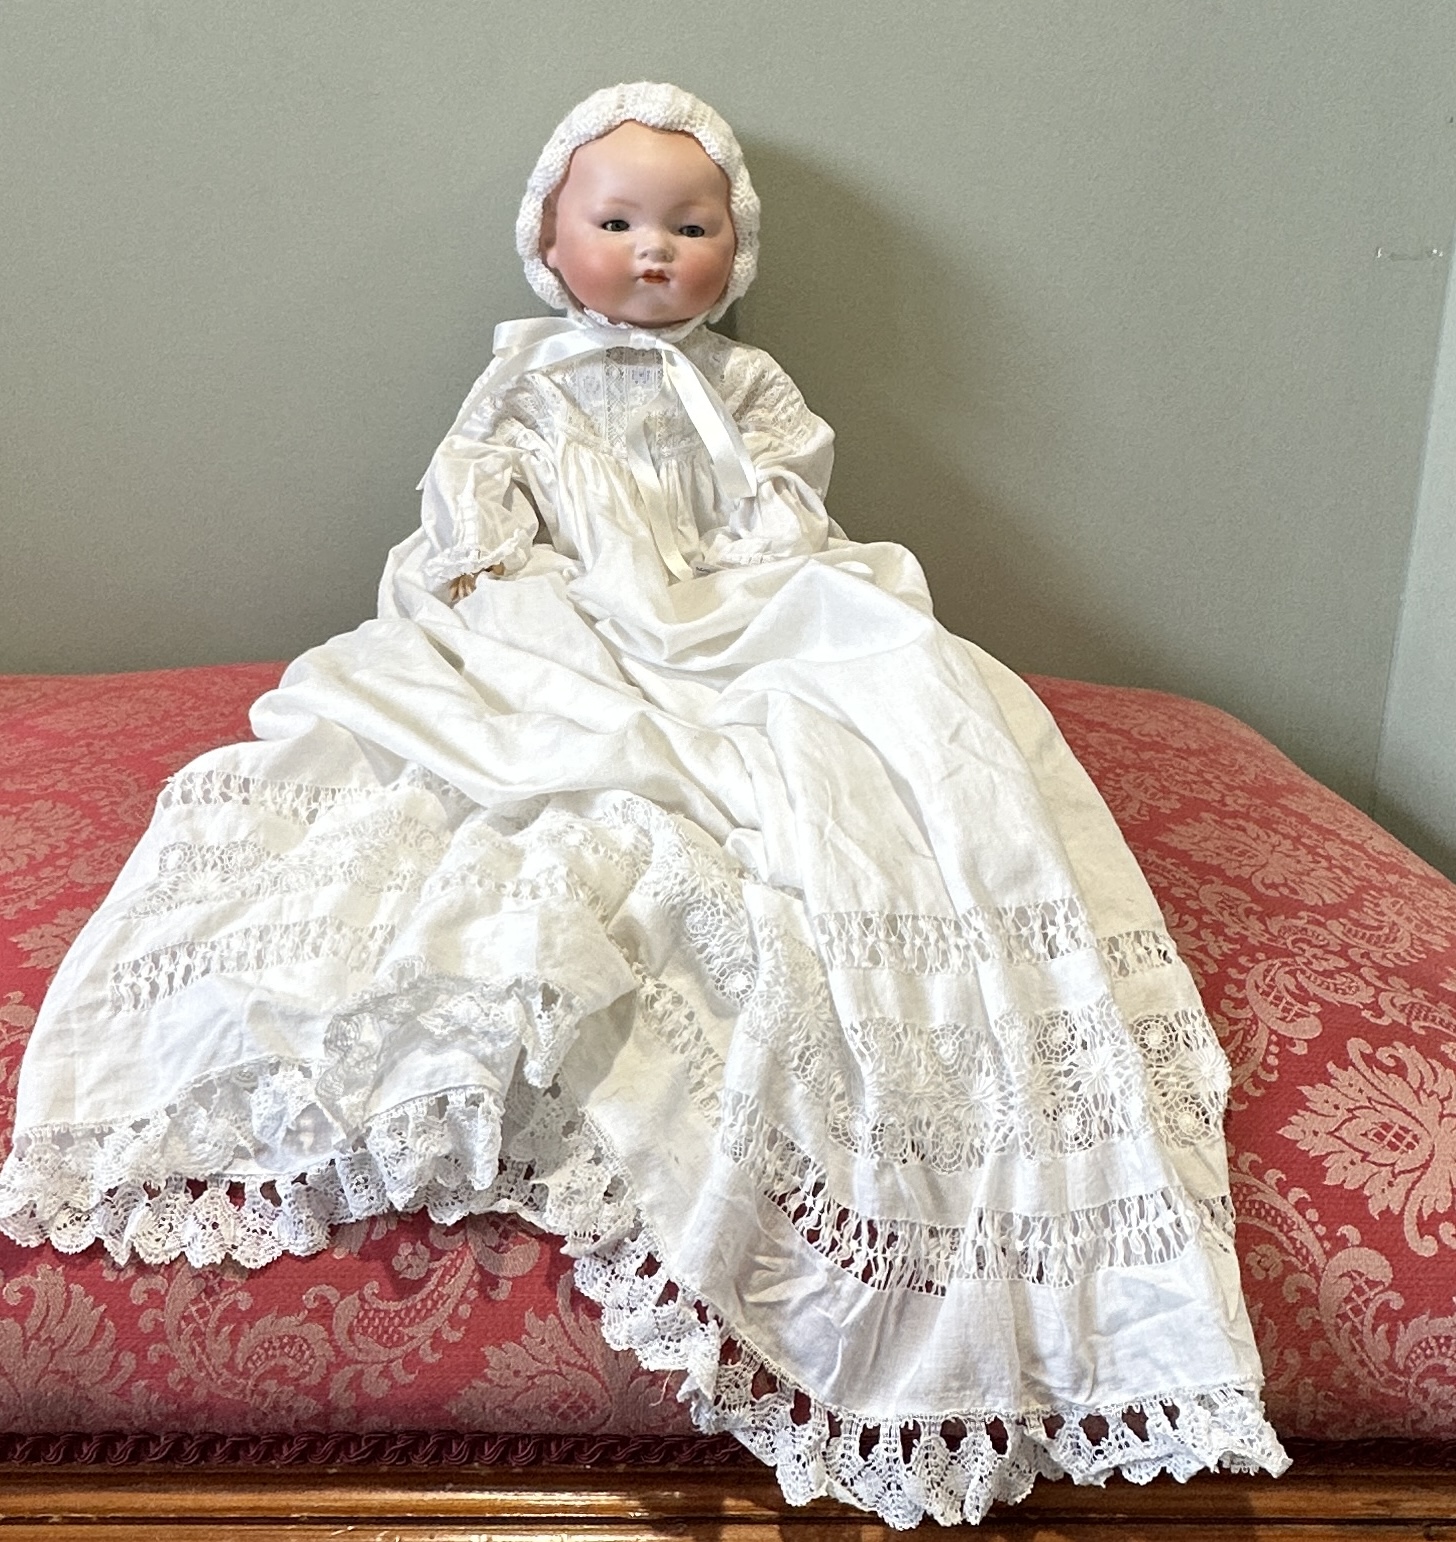 One Armand Marseille bisque headed doll in white cotton gowns. Marked A.M. Germany 341/8